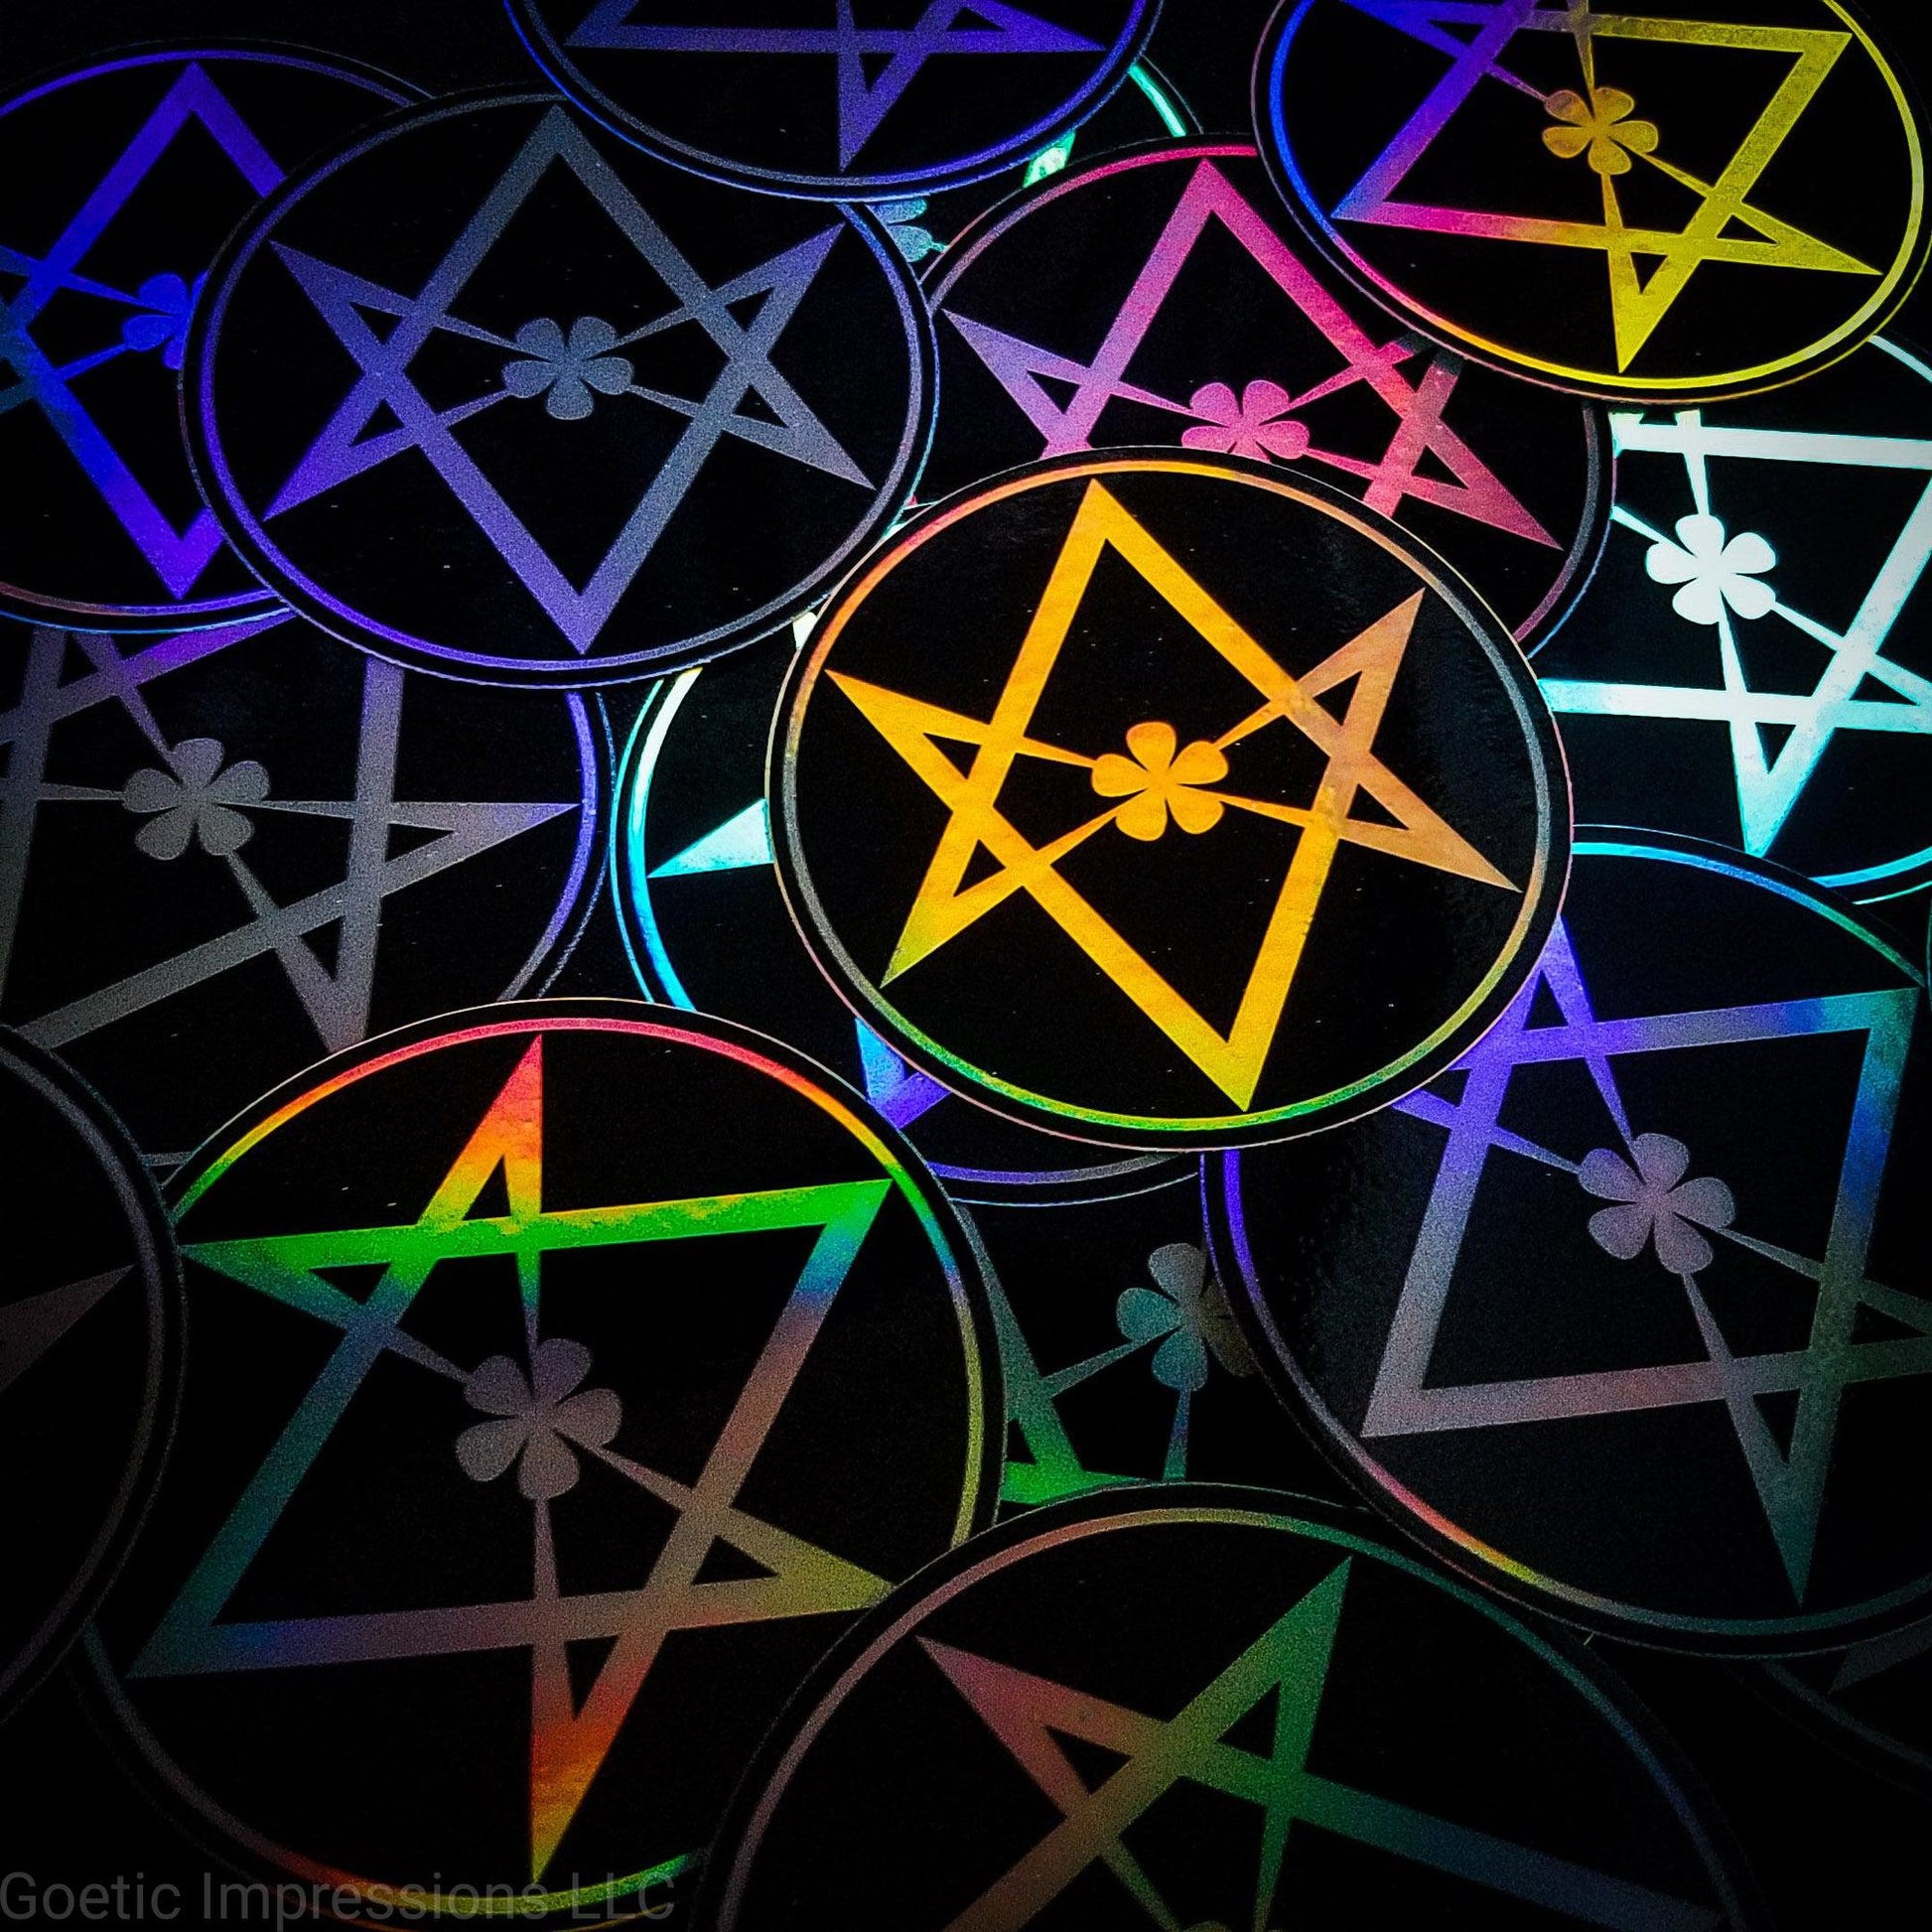 A pile of three inch circular holographic stickers. The stickers have a black background and a white symbol featuring the Unicursal Hexagram with a flower petal in the center. The holographic paper shines in a wide arrange of rainbow colors when the light catches it at different angles. 